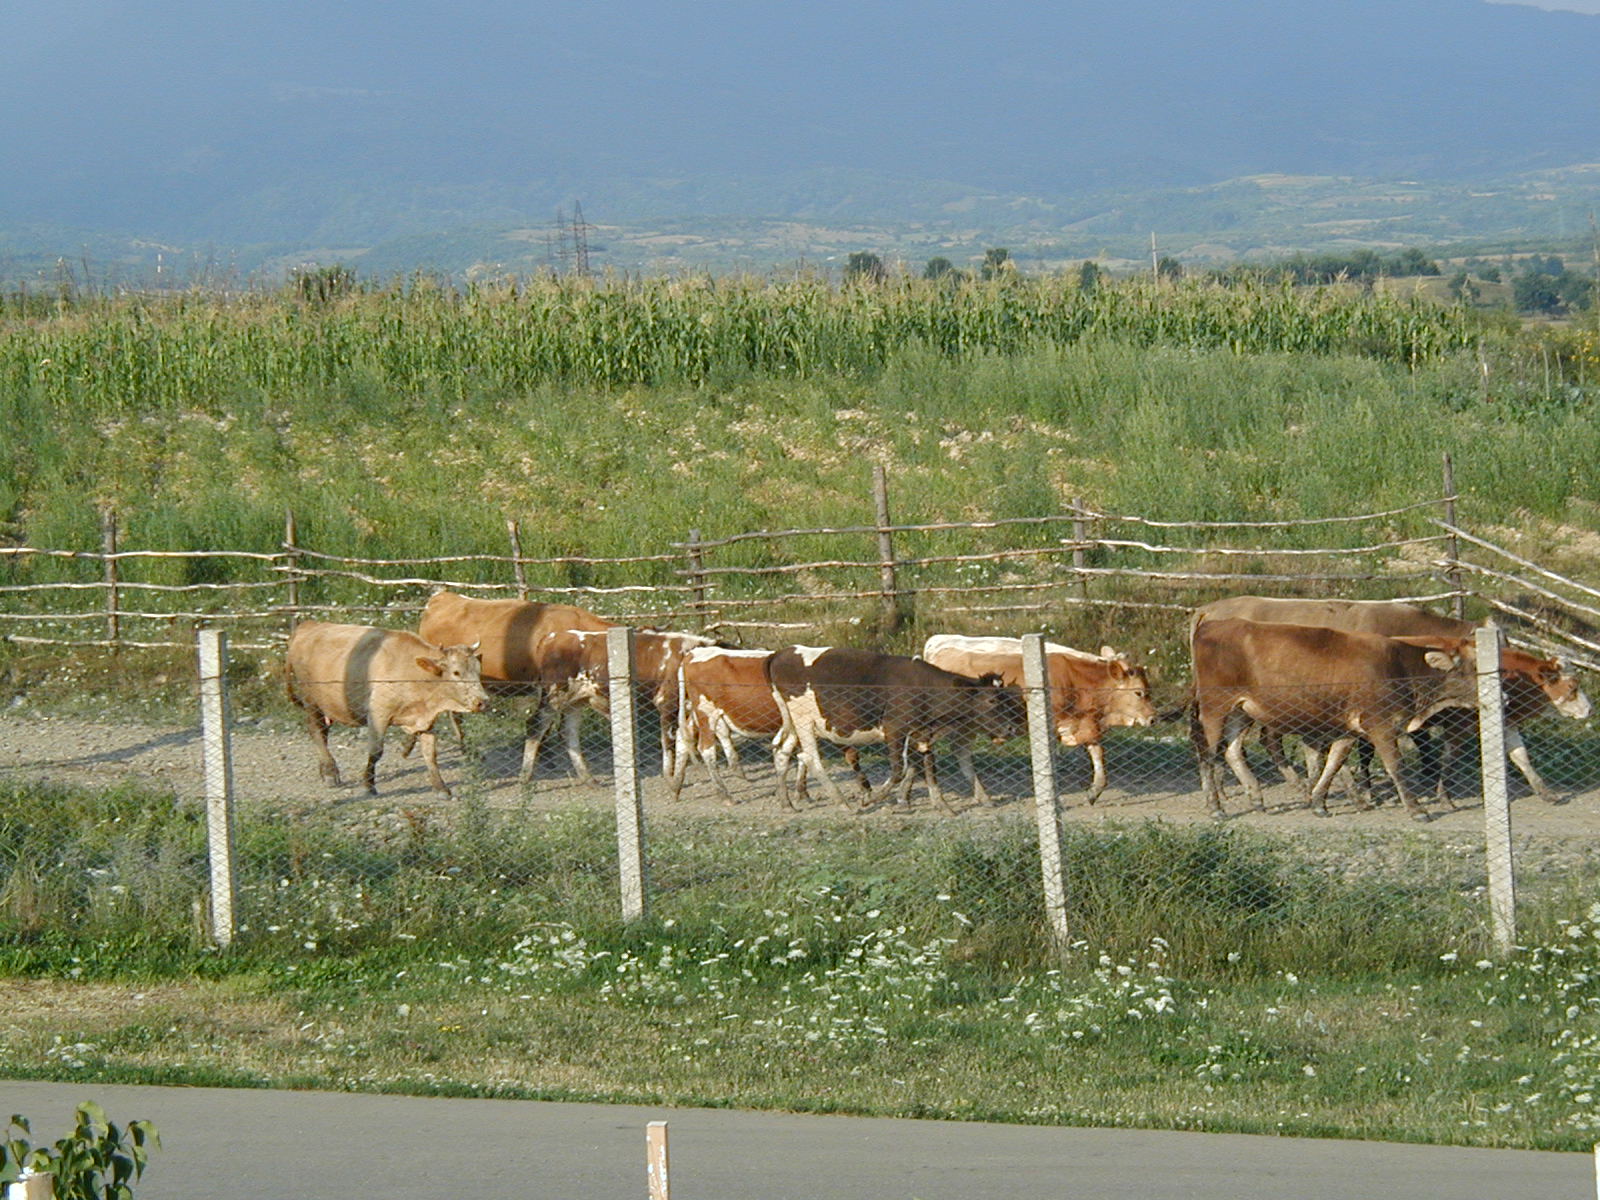 The orphange's own herd of cows.